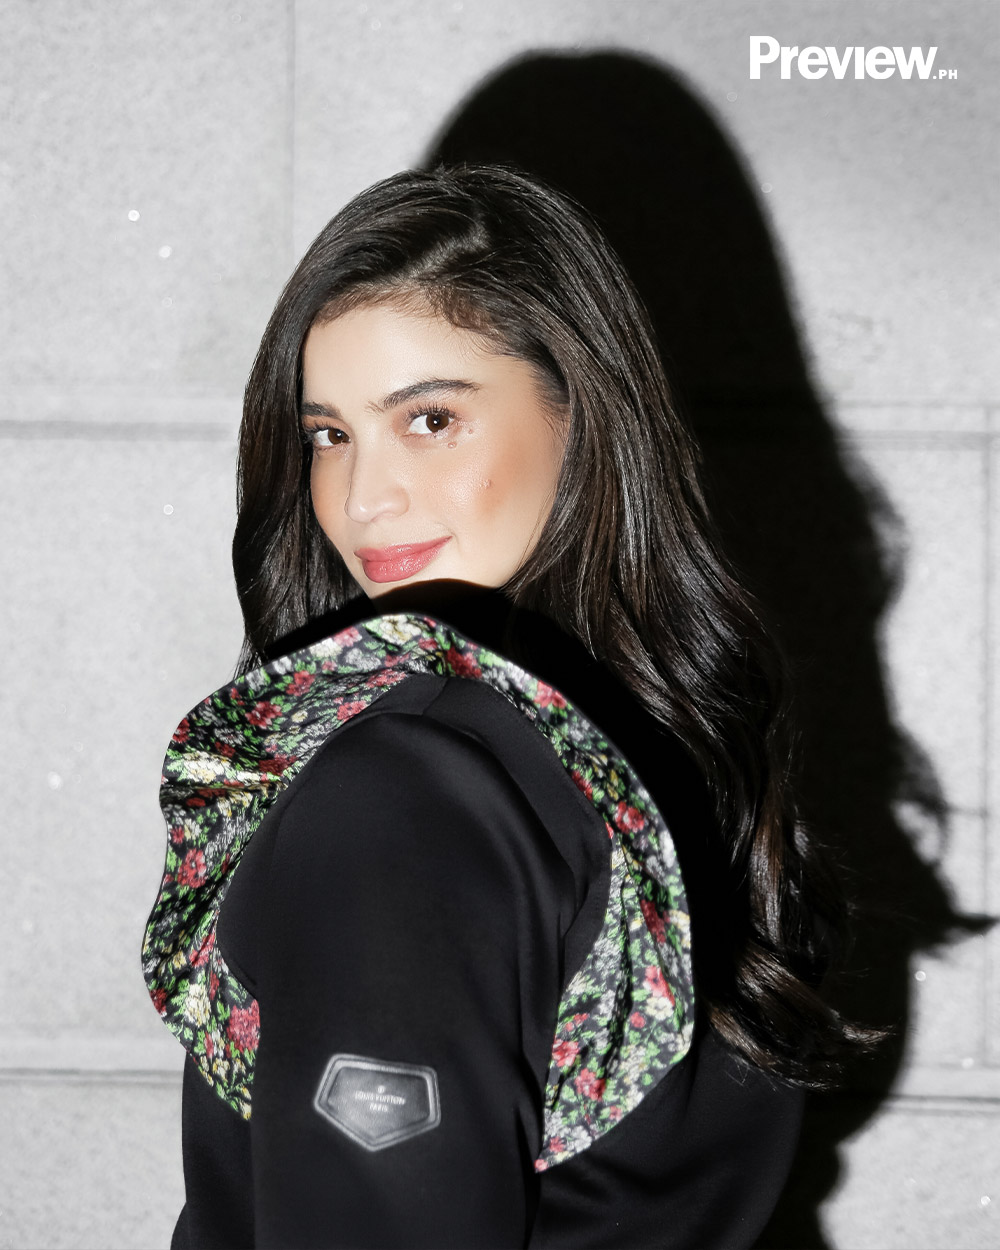 Anne Curtis Fans on X: Anne Curtis (@annecurtissmith) attends the opening  of @LouisVuitton's new Maison in Seoul #루이비통서울 #LVSeoul #LVPhilippines   / X